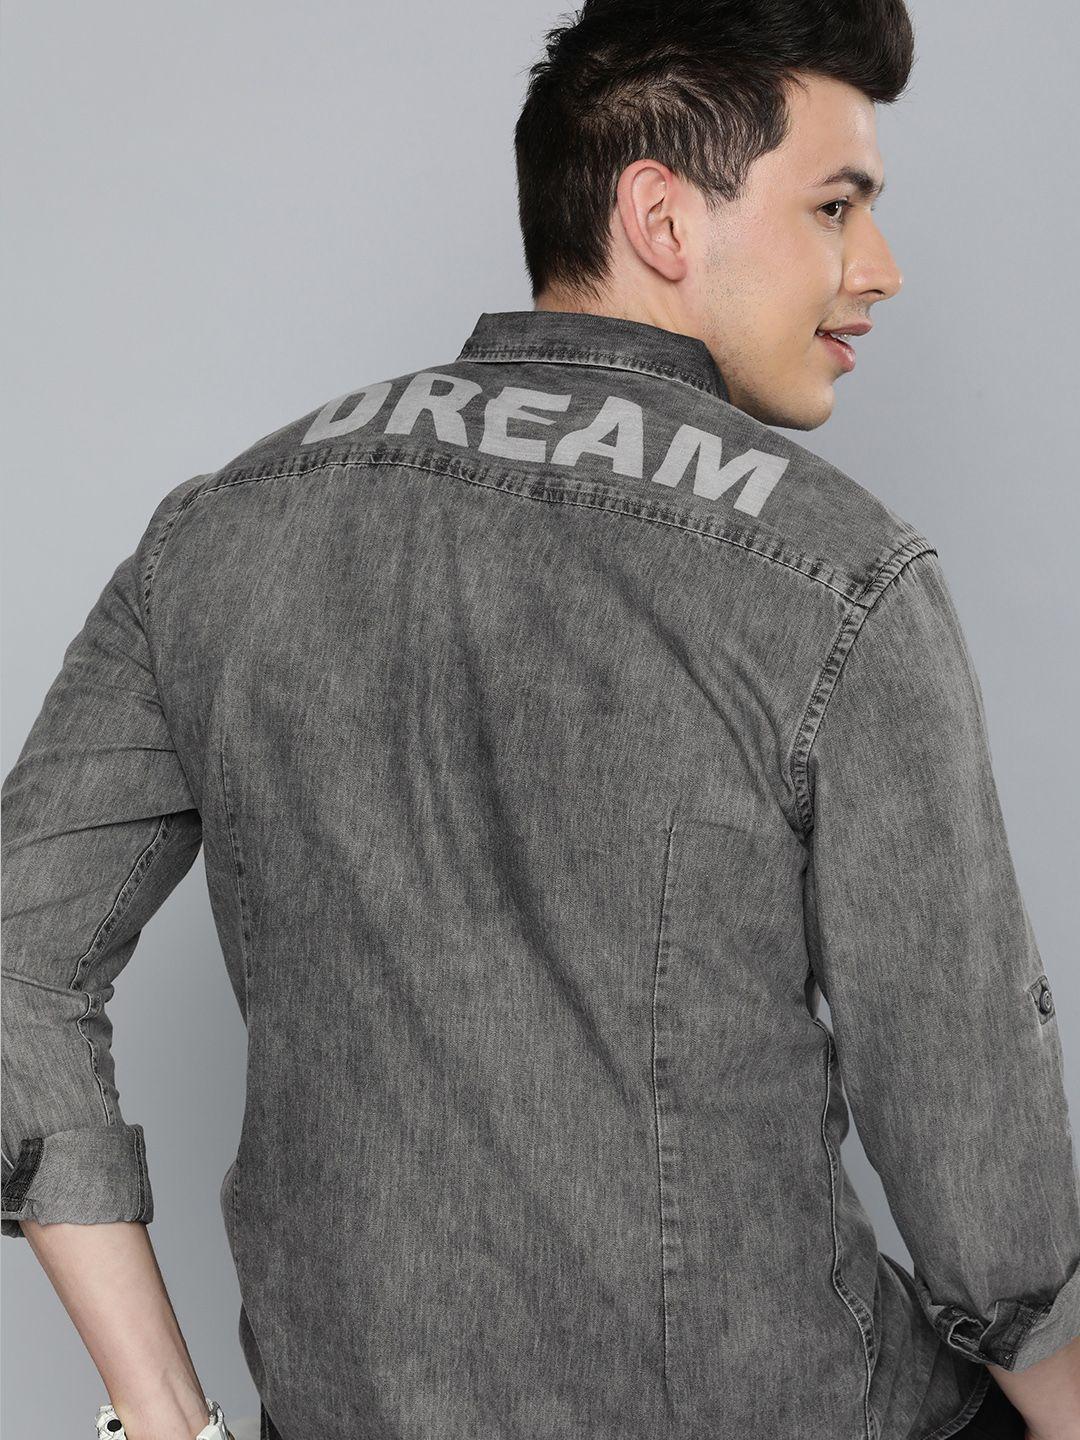 here&now men grey regular fit solid opaque pure cotton sustainable casual shirt with yoke print